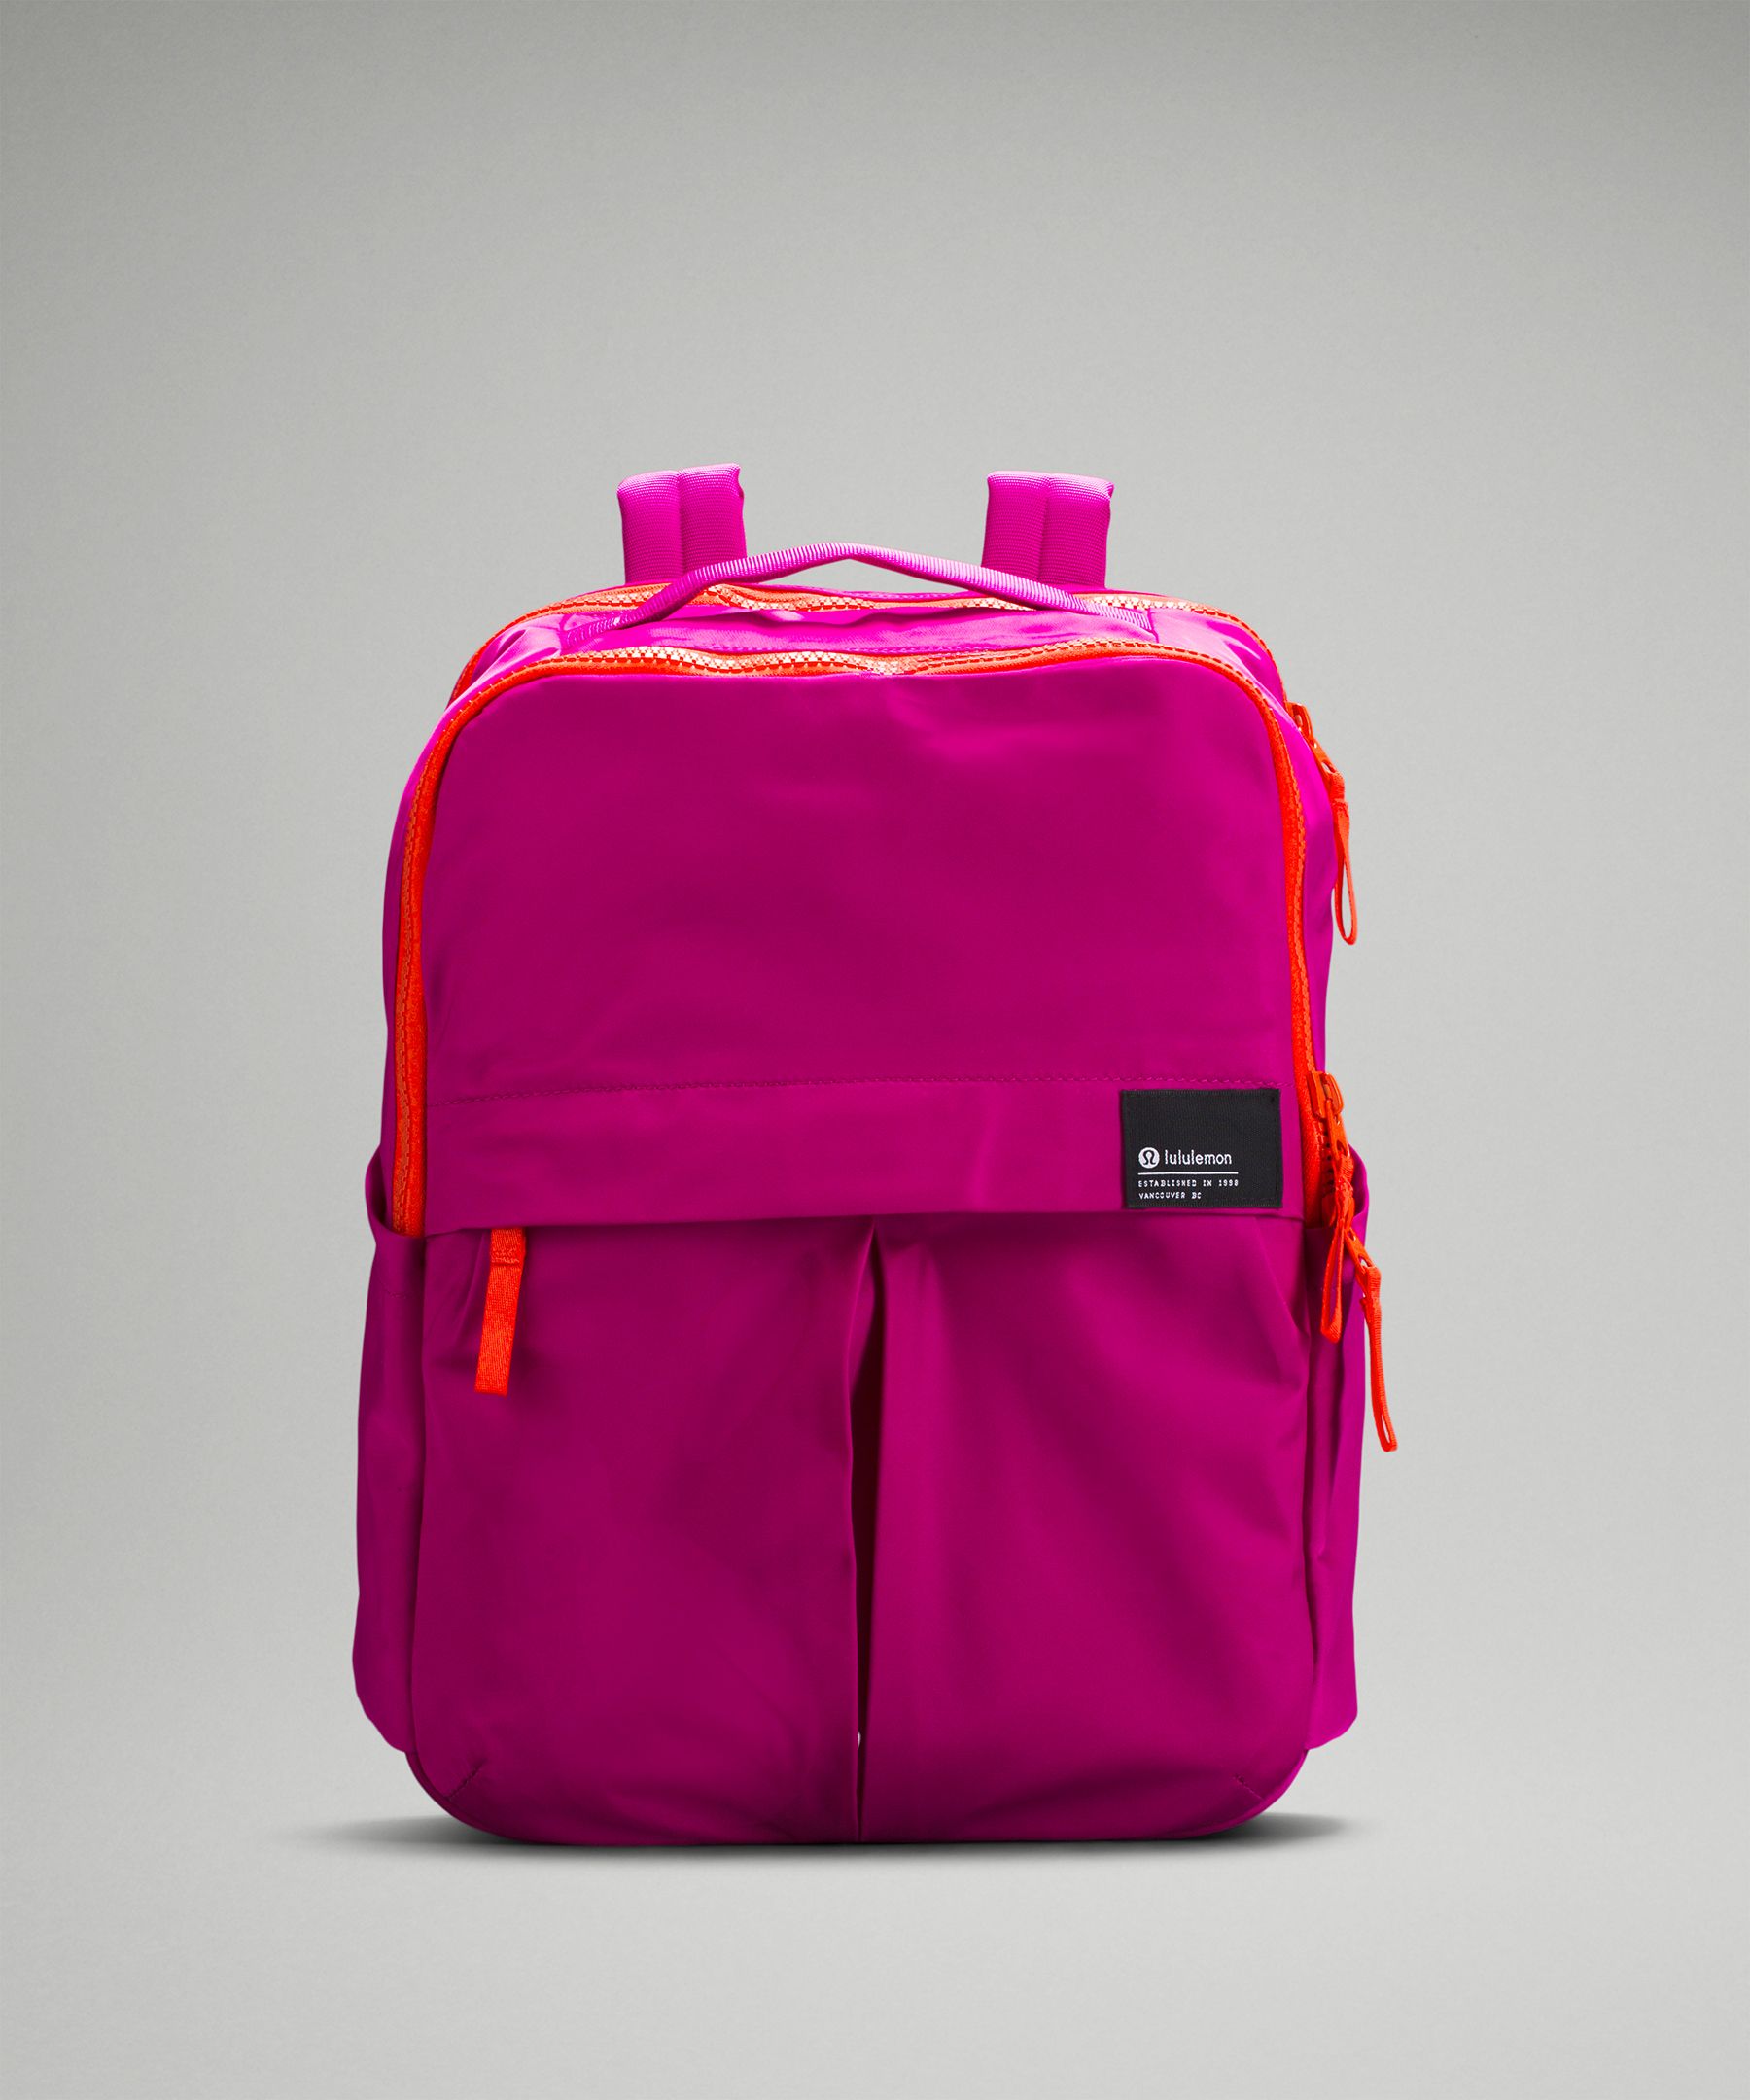 Lululemon Everyday Backpack 2.0 23l In Ripened Raspberry/autumn Red